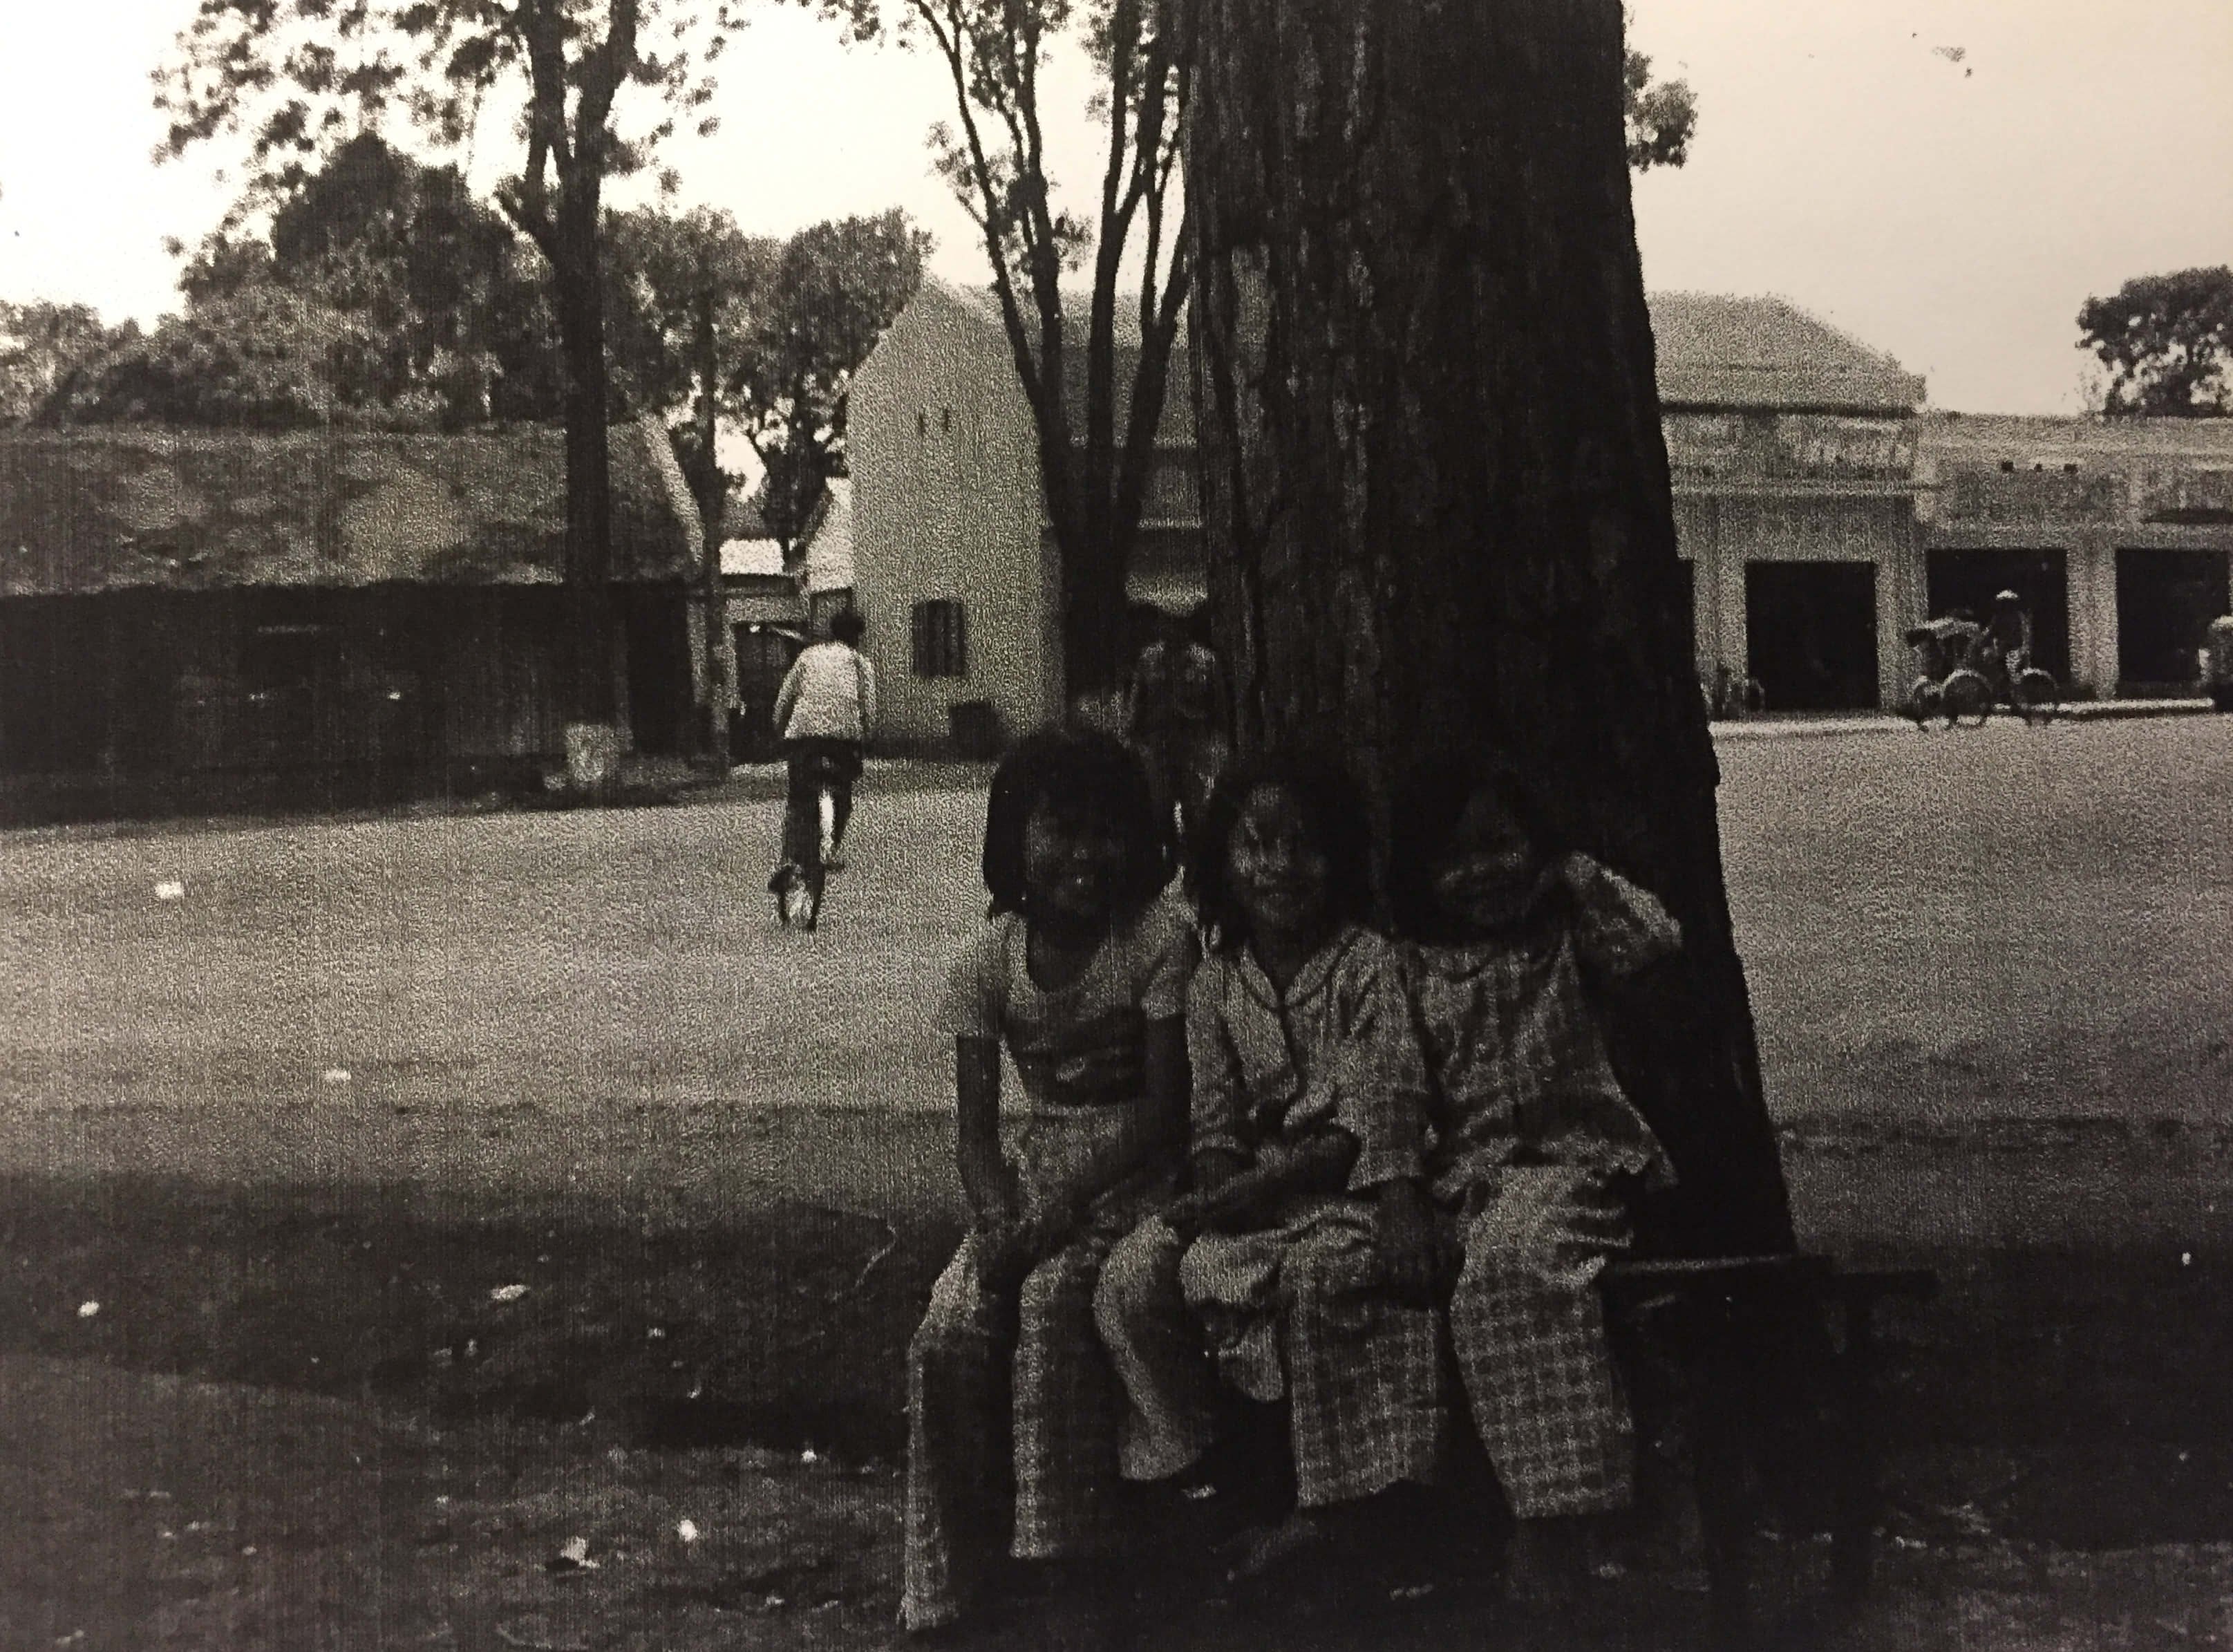 Three young girls sitting on a bench under the shade of a tree. People ride bicycles on the street in the background.